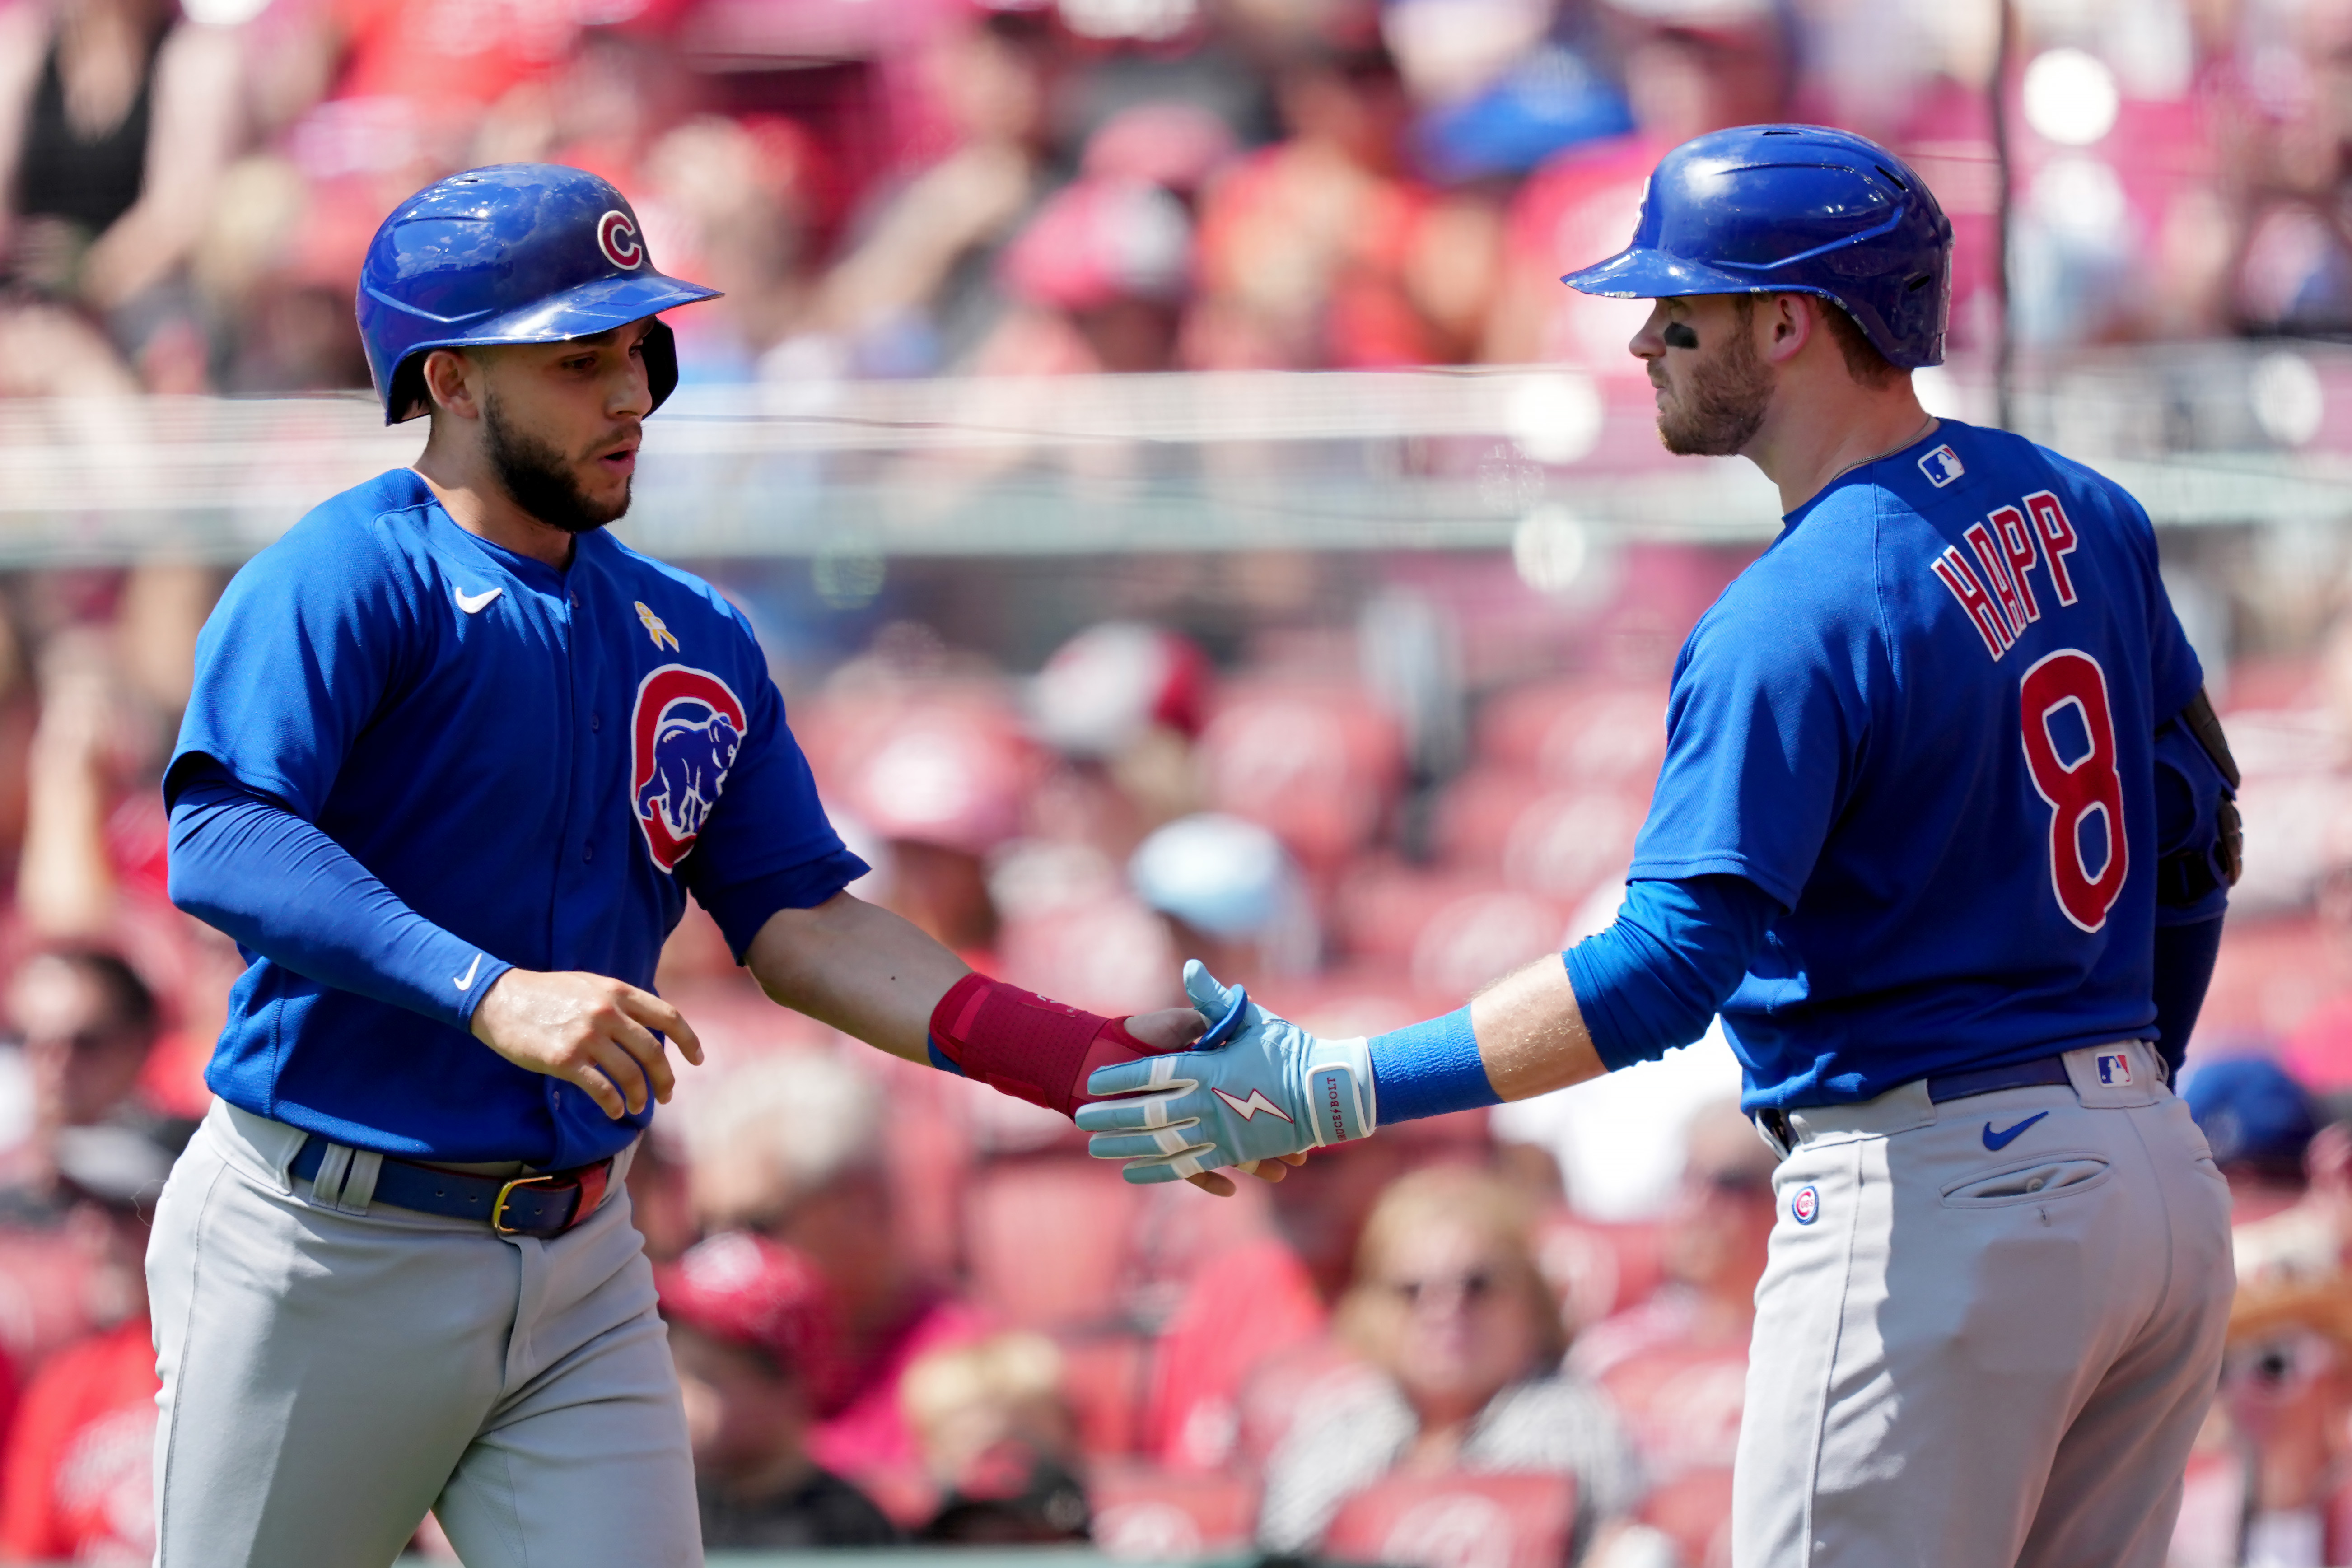 10th inning homer gives Cubs 4-3 win over Reds